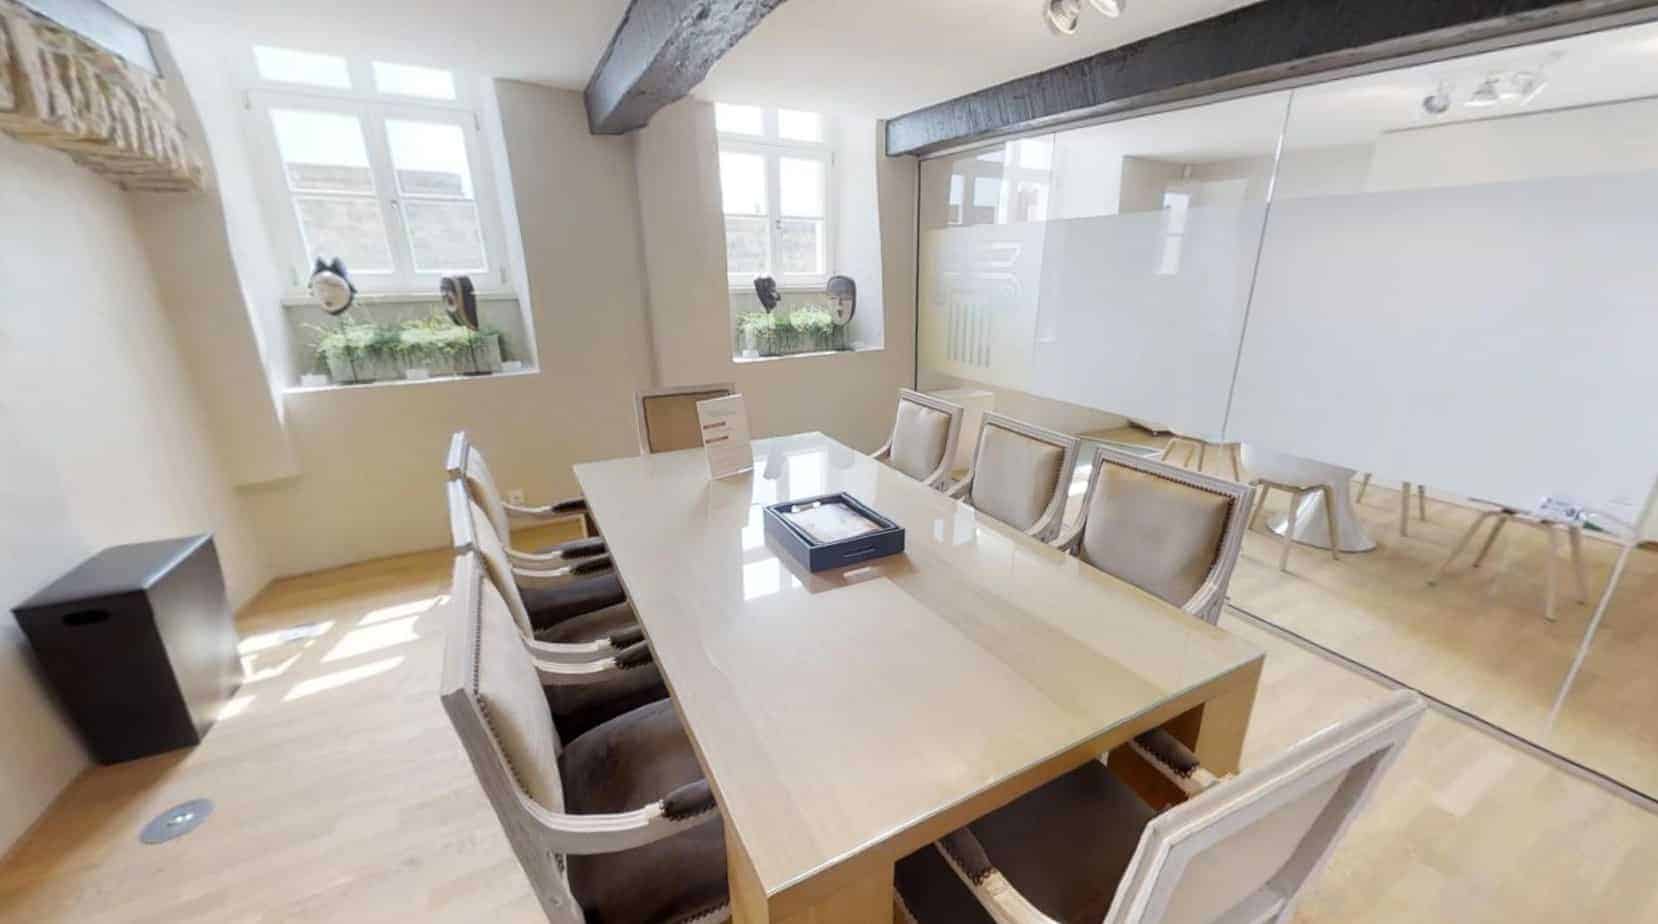 Intimate meeting room with robust features